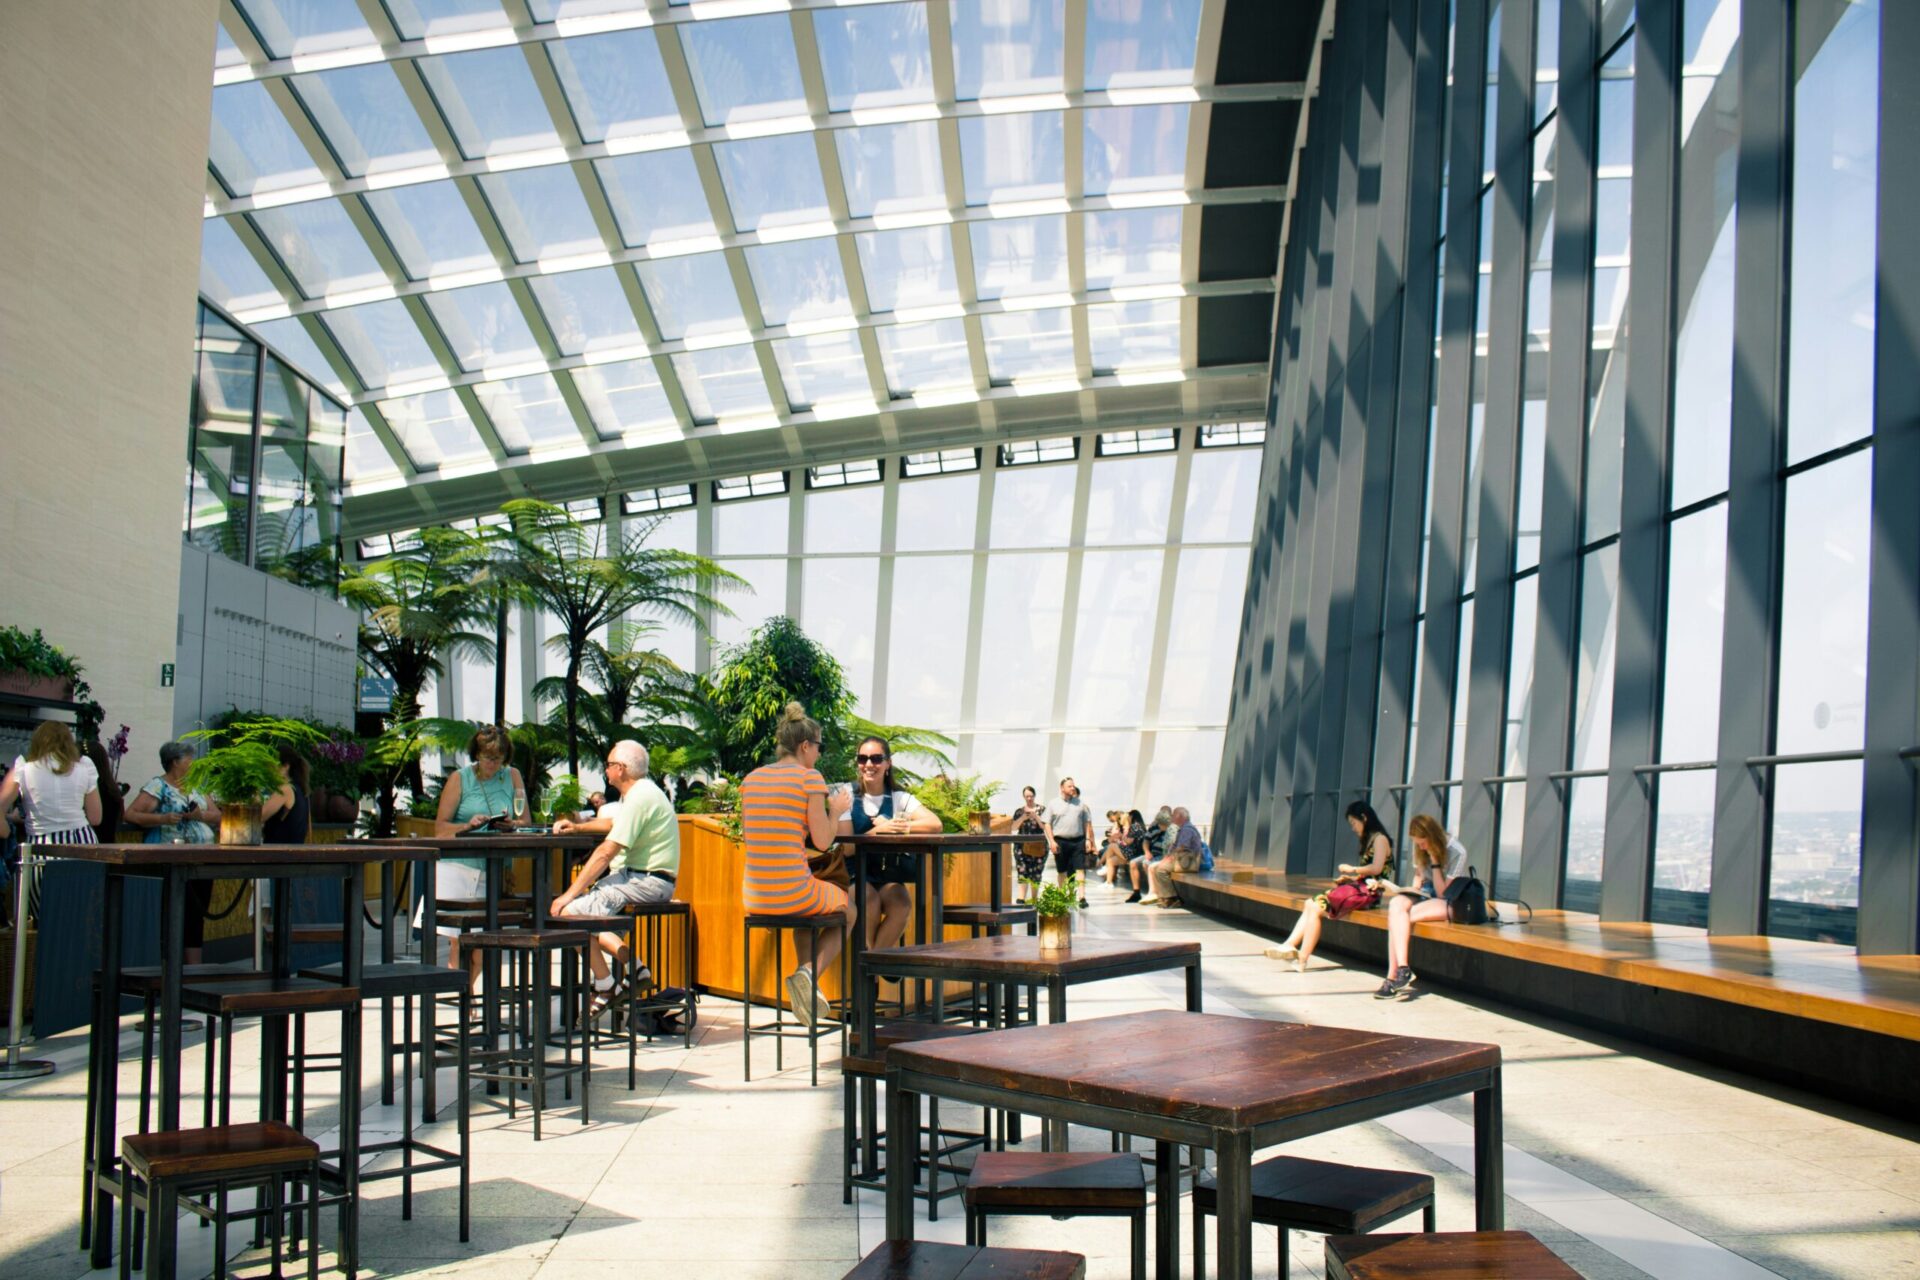 People sitting in an open space cafe with large glass windows